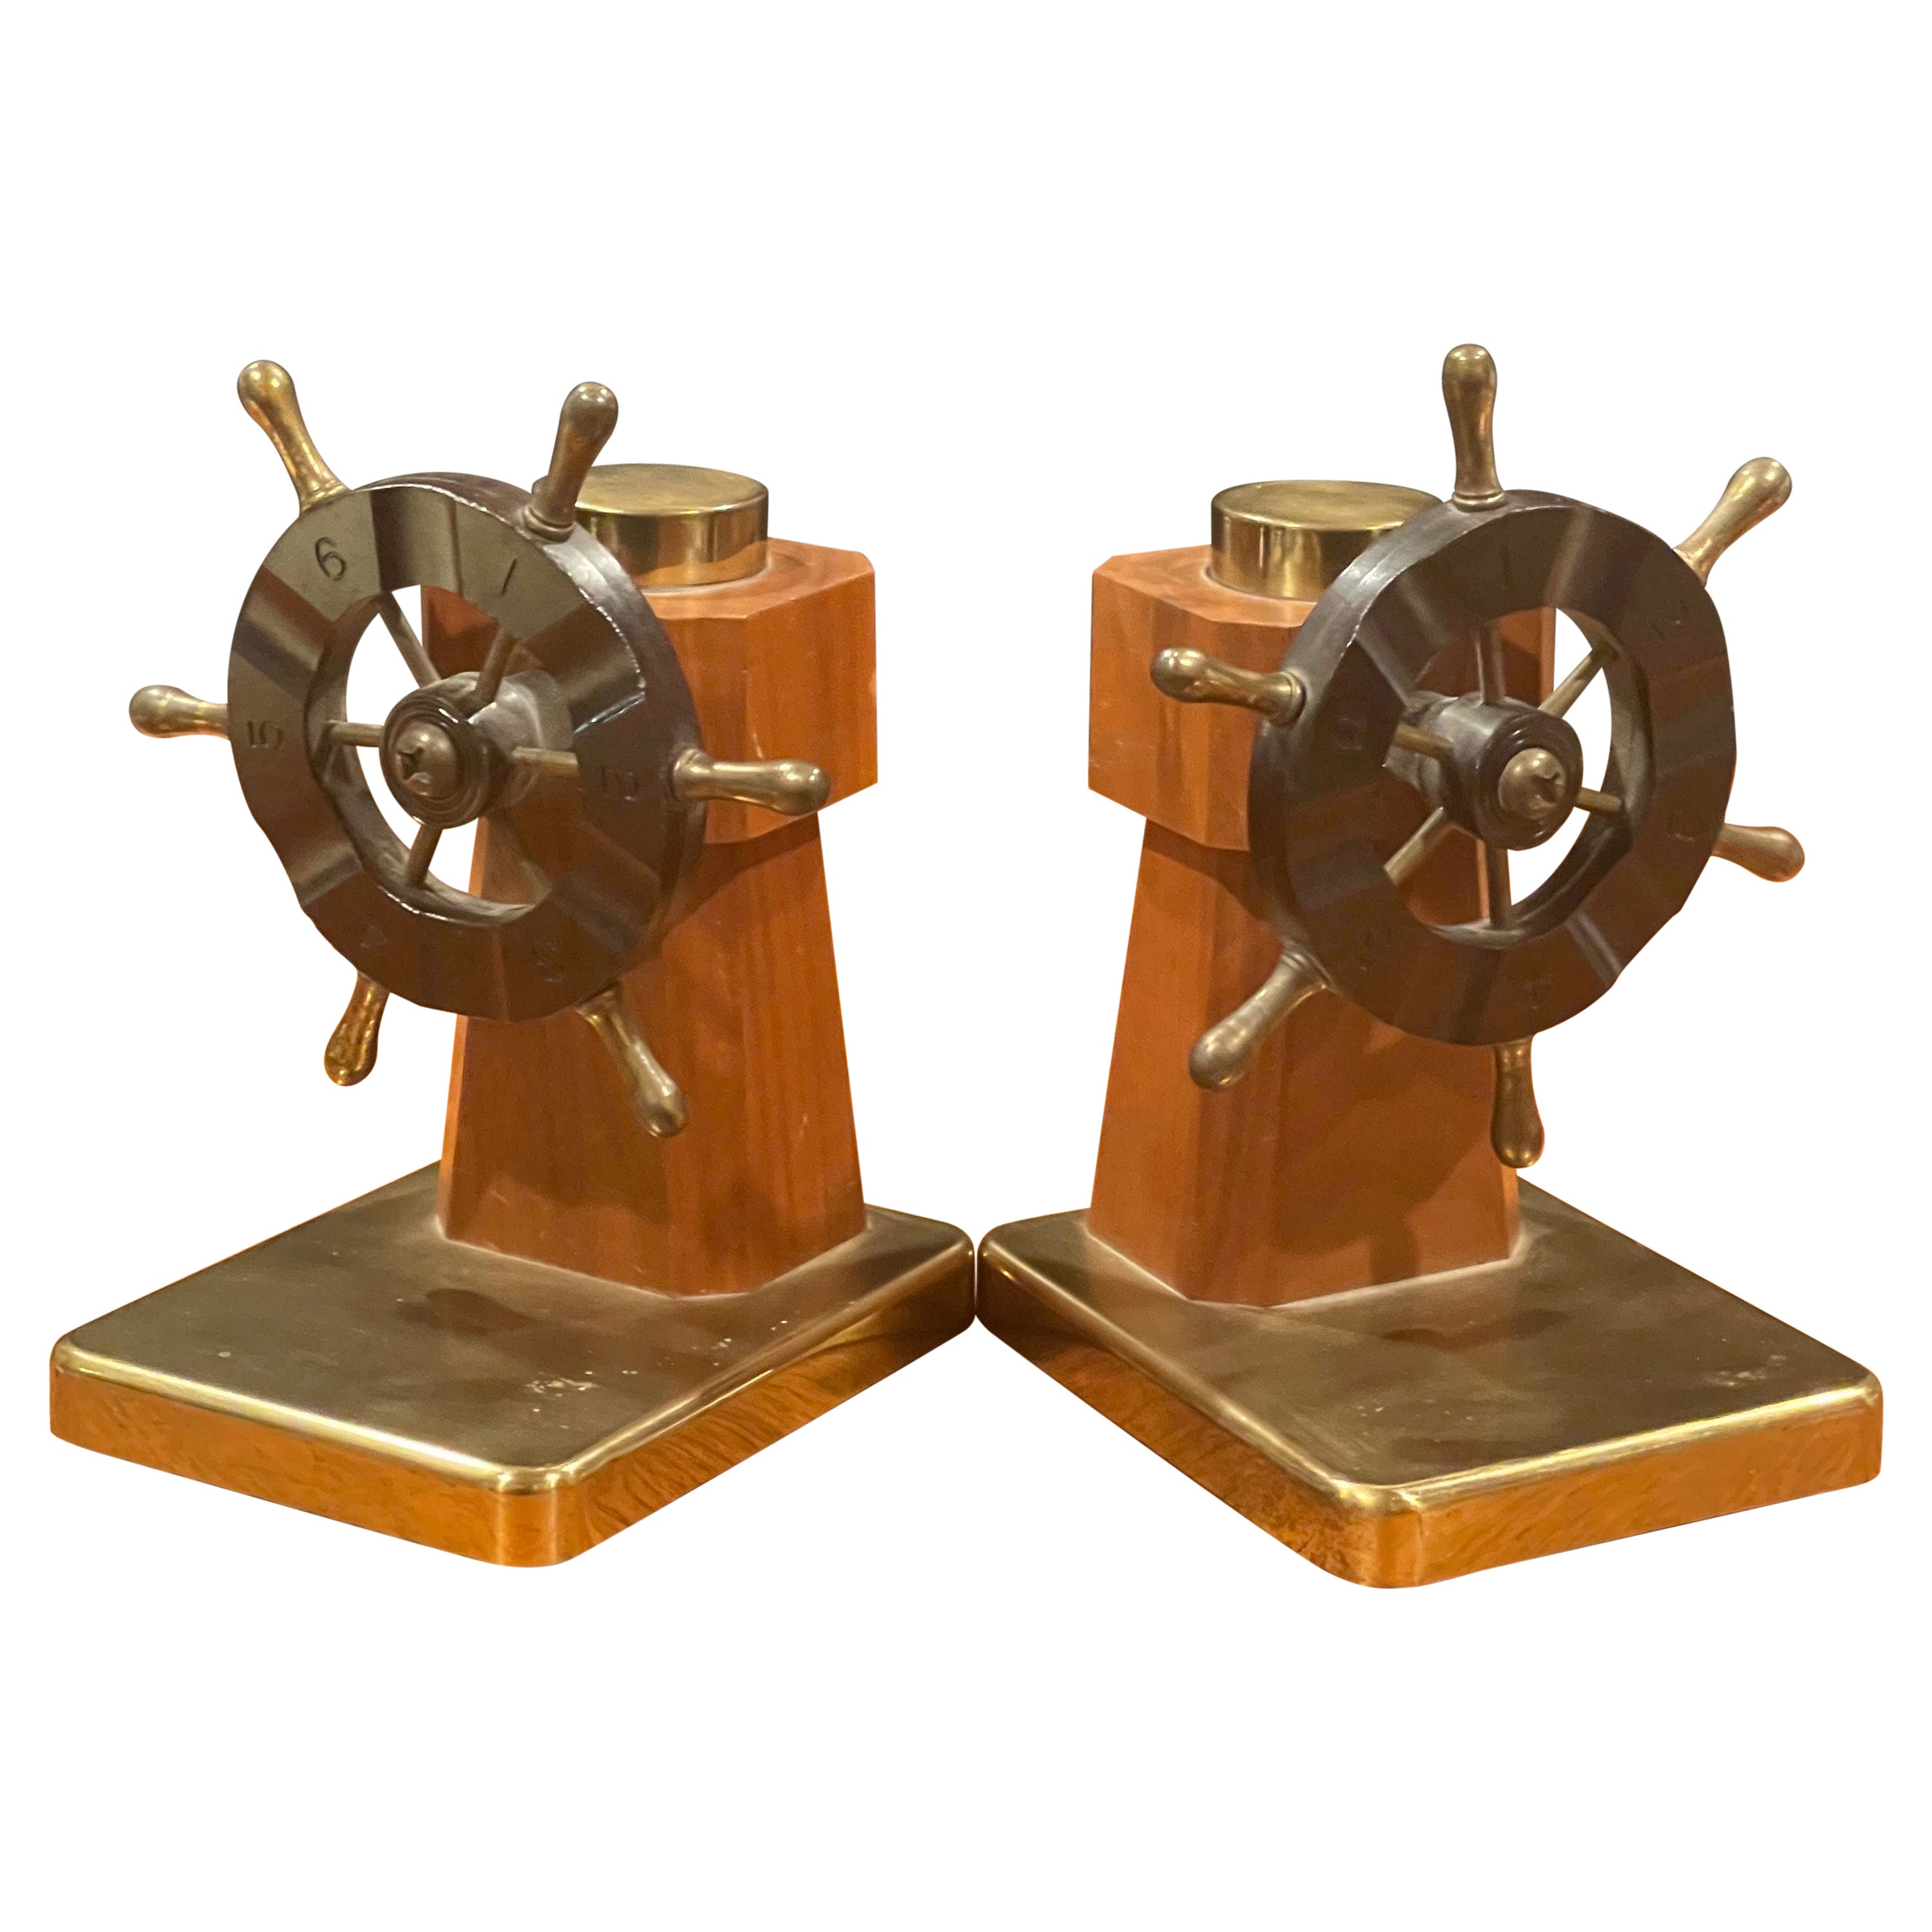 Pair of Art Deco Ship's Wheel Bookends by Walter Von Nessen for Chase & Co. For Sale